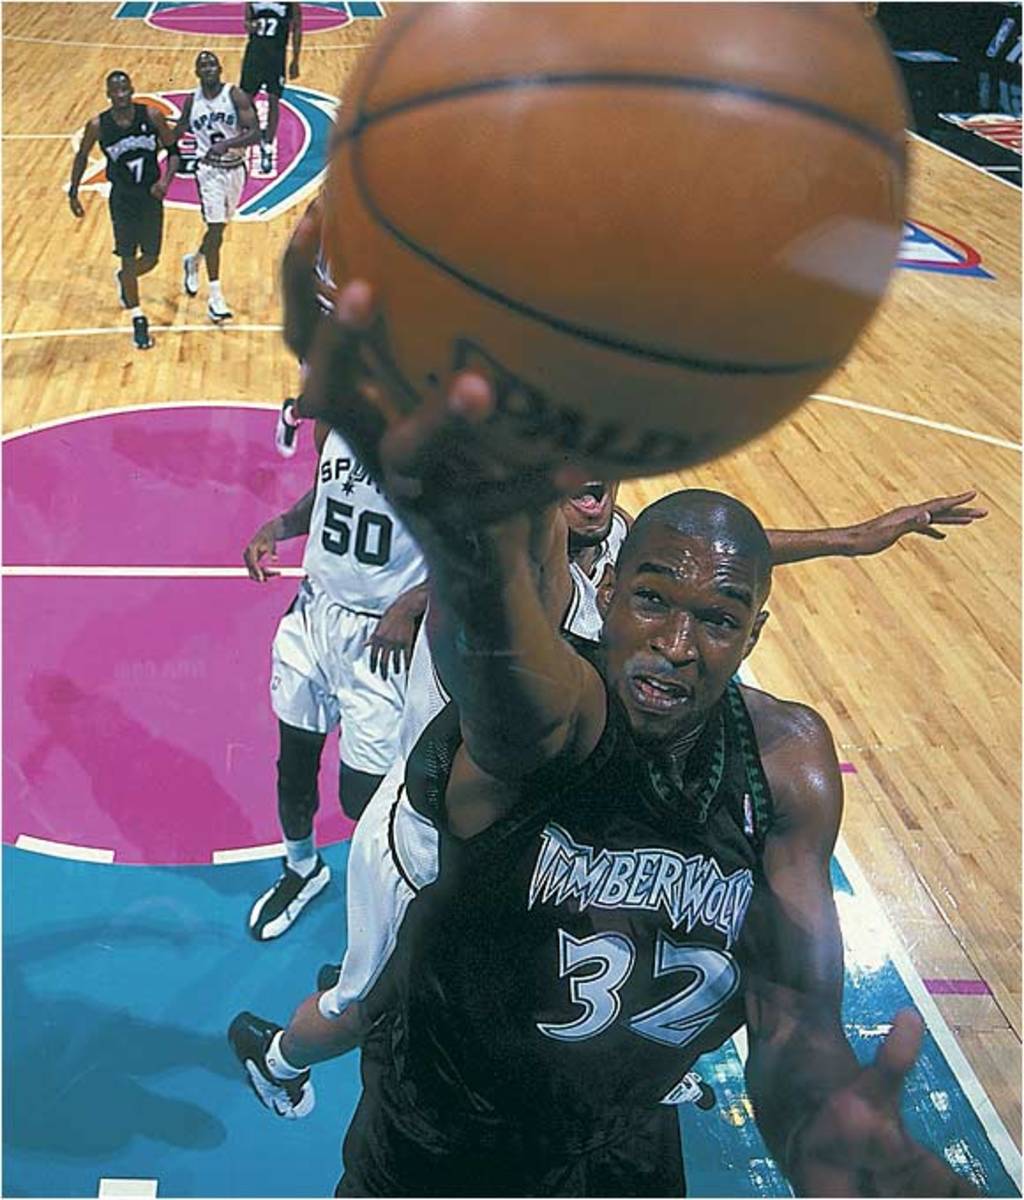 The Denver Nuggets and the ill-fated summer of 1996 - The Athletic